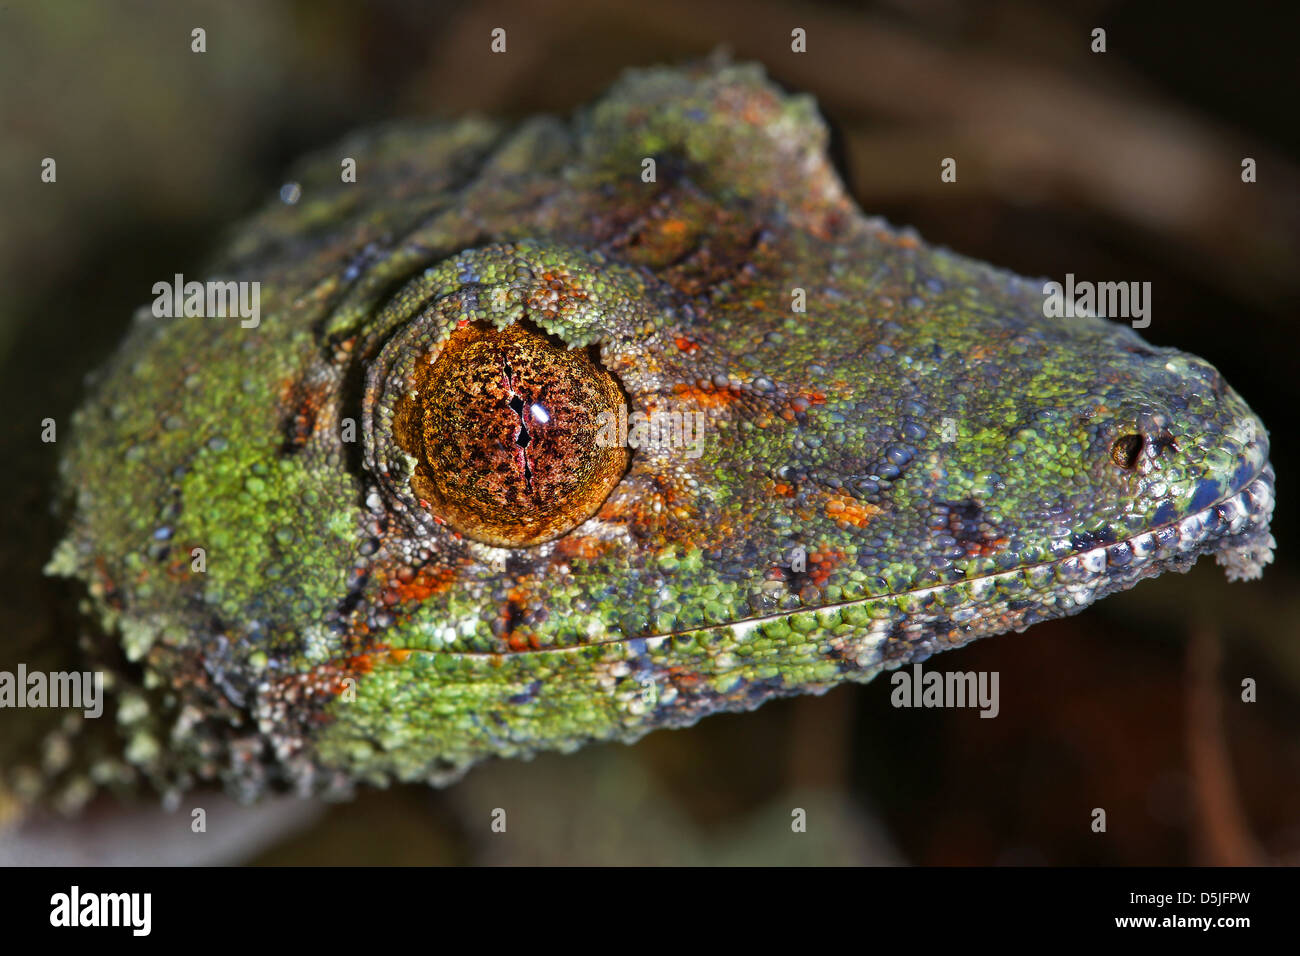 Giant Leaf-tailed Gecko (Uroplatus fimbriatus) in Ranomafana, Madagascar. Gecko perches on a branch at night to prey on insects. Stock Photo